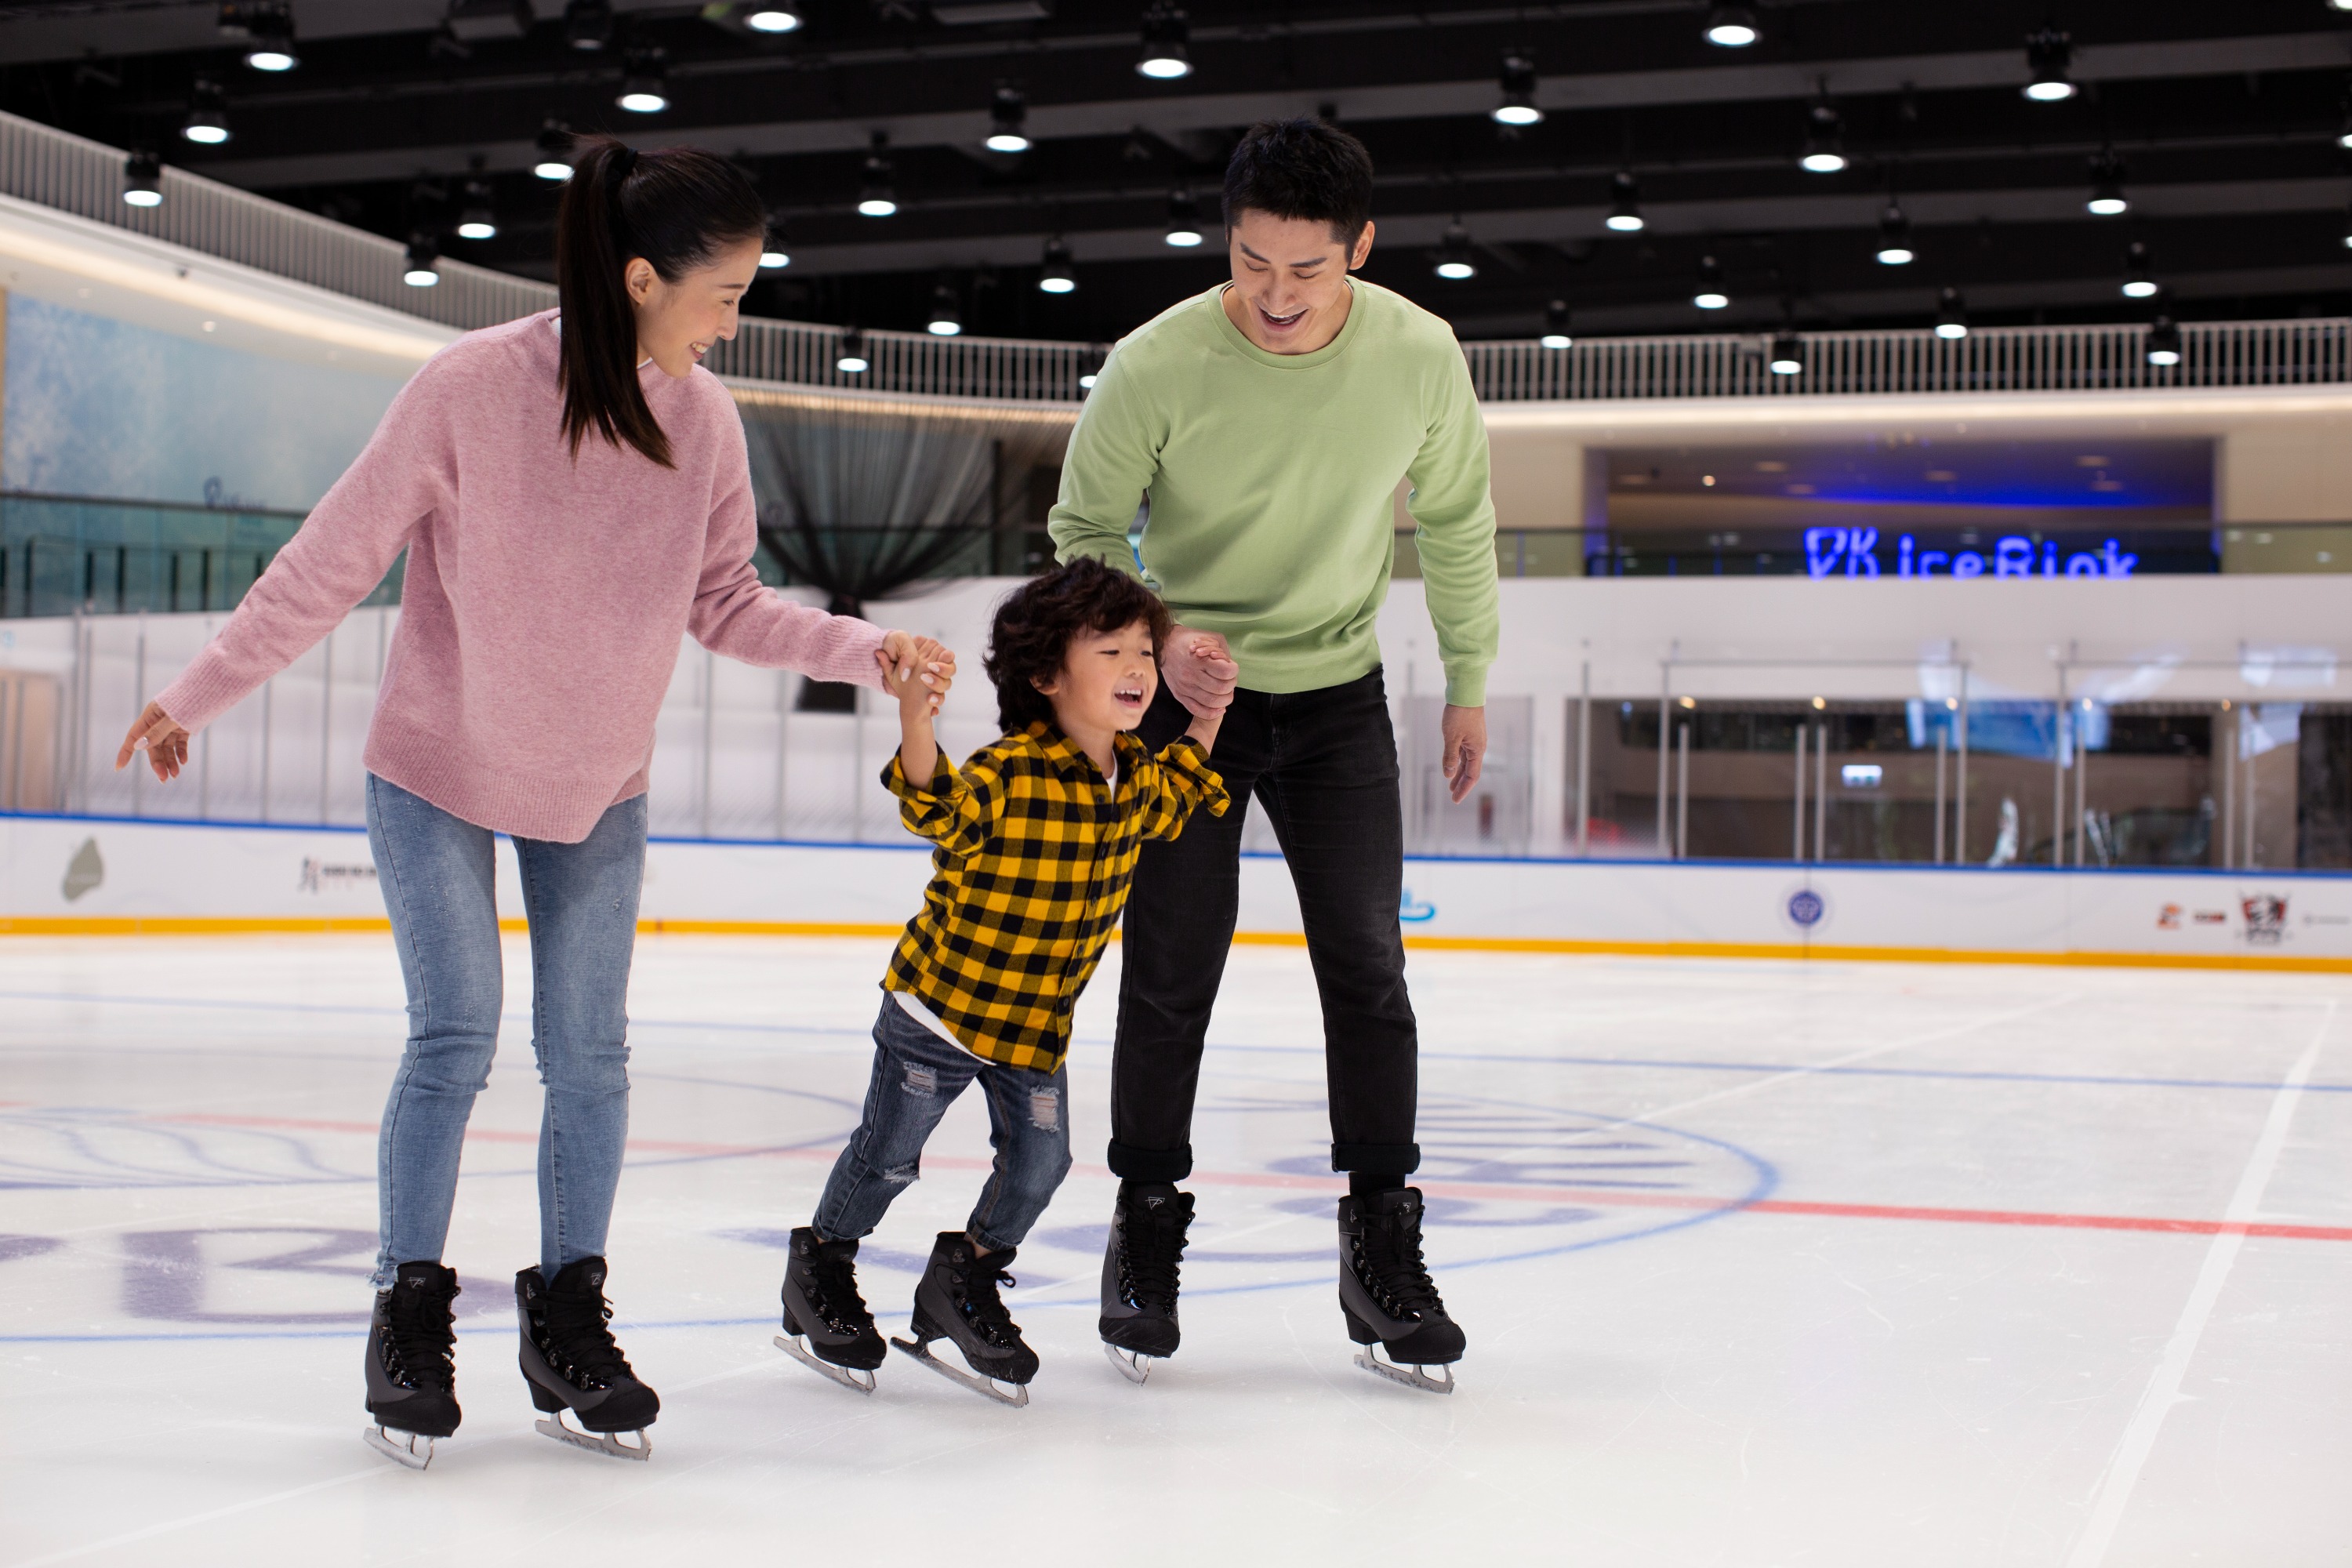 Skating is a great way to bond with your children and enhance the parent-child relationship.